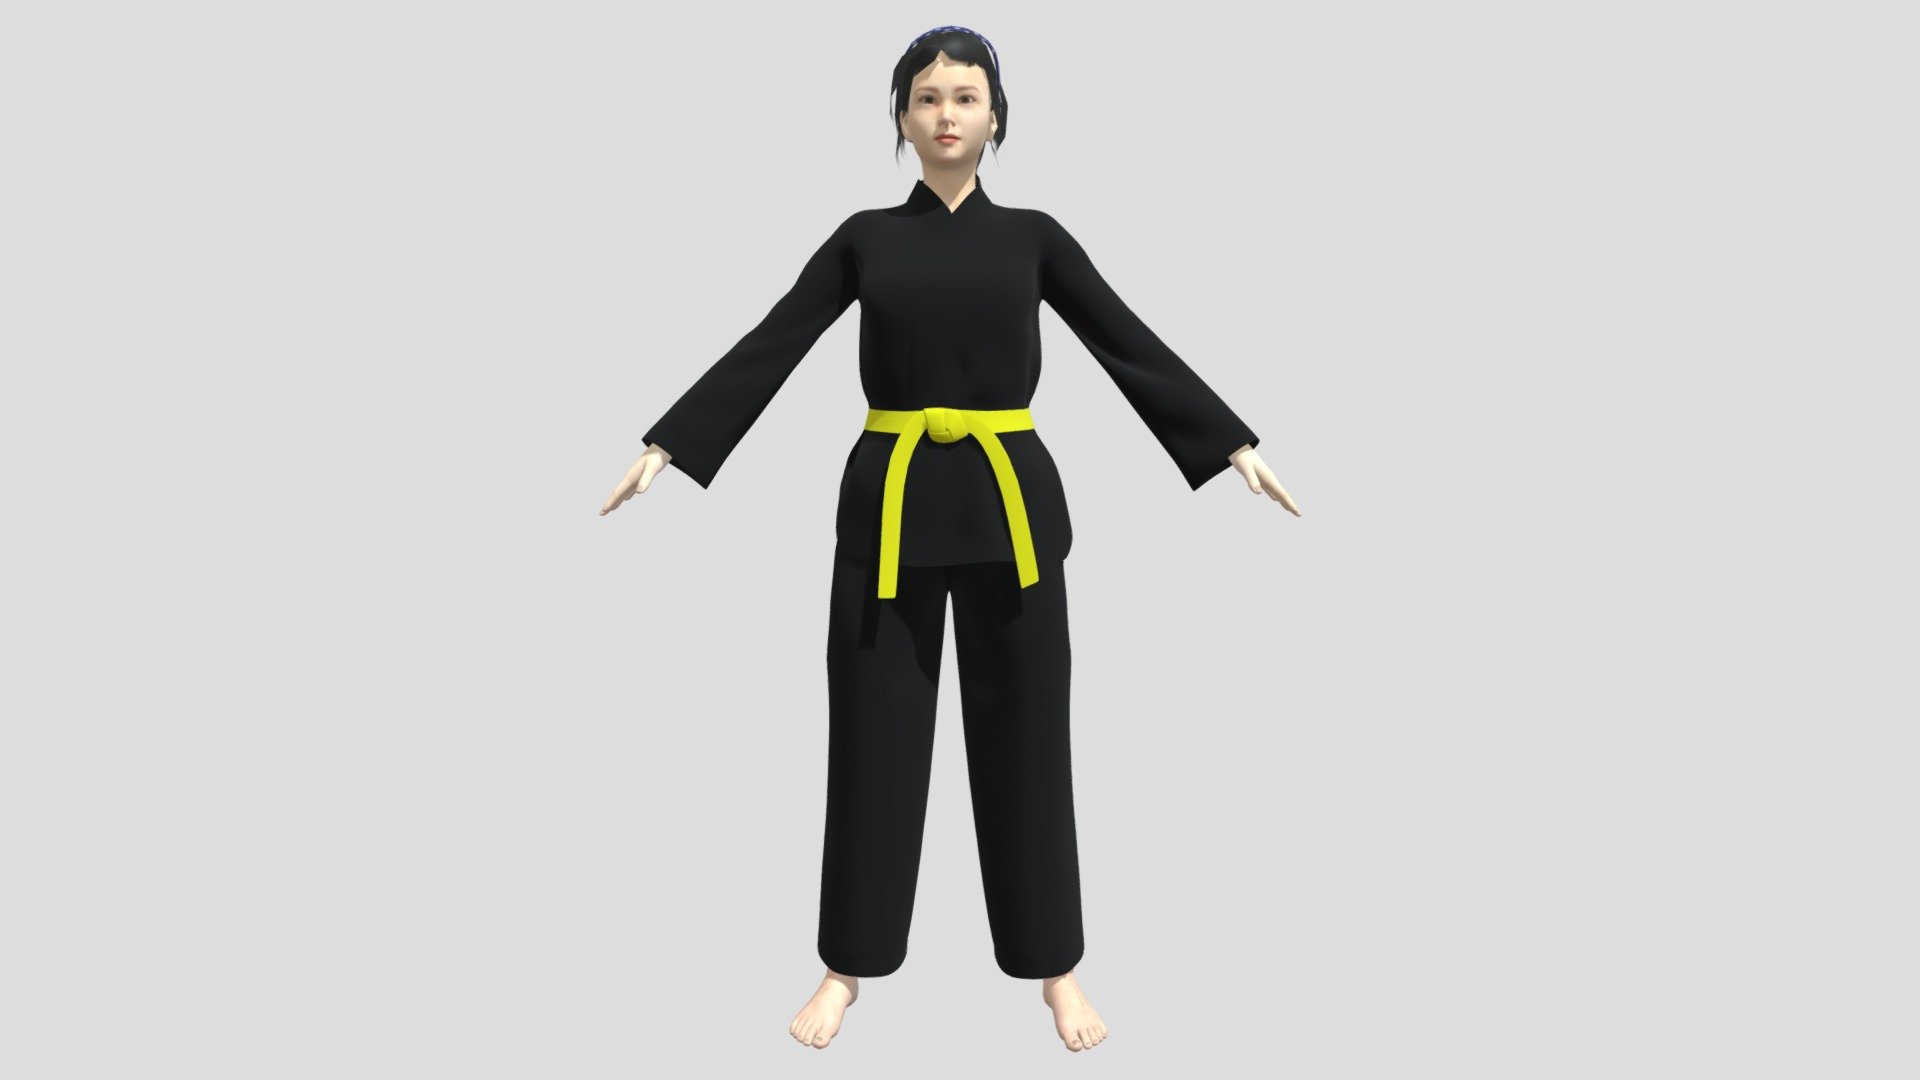 Karate Girl 3D model is a high quality, photo real model that will enhance detail and realism to any of your game projects or commercials. The model has a fully textured, detailed design that allows for close-up renders 3d model